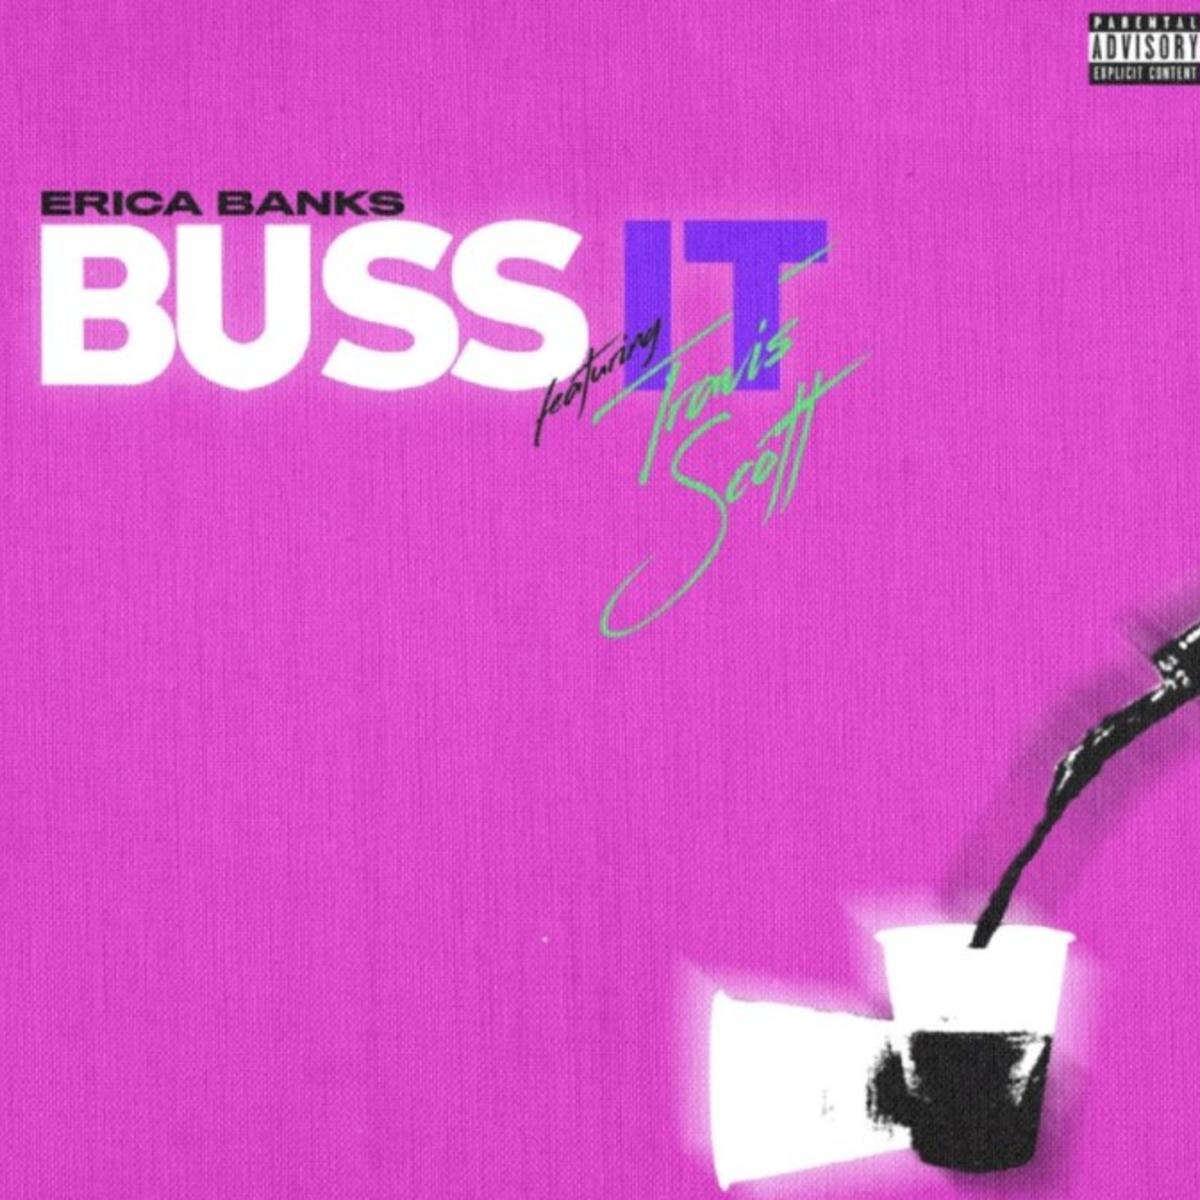 Erica Banks Calls On Travis Scott For A Remix To “Buss It”